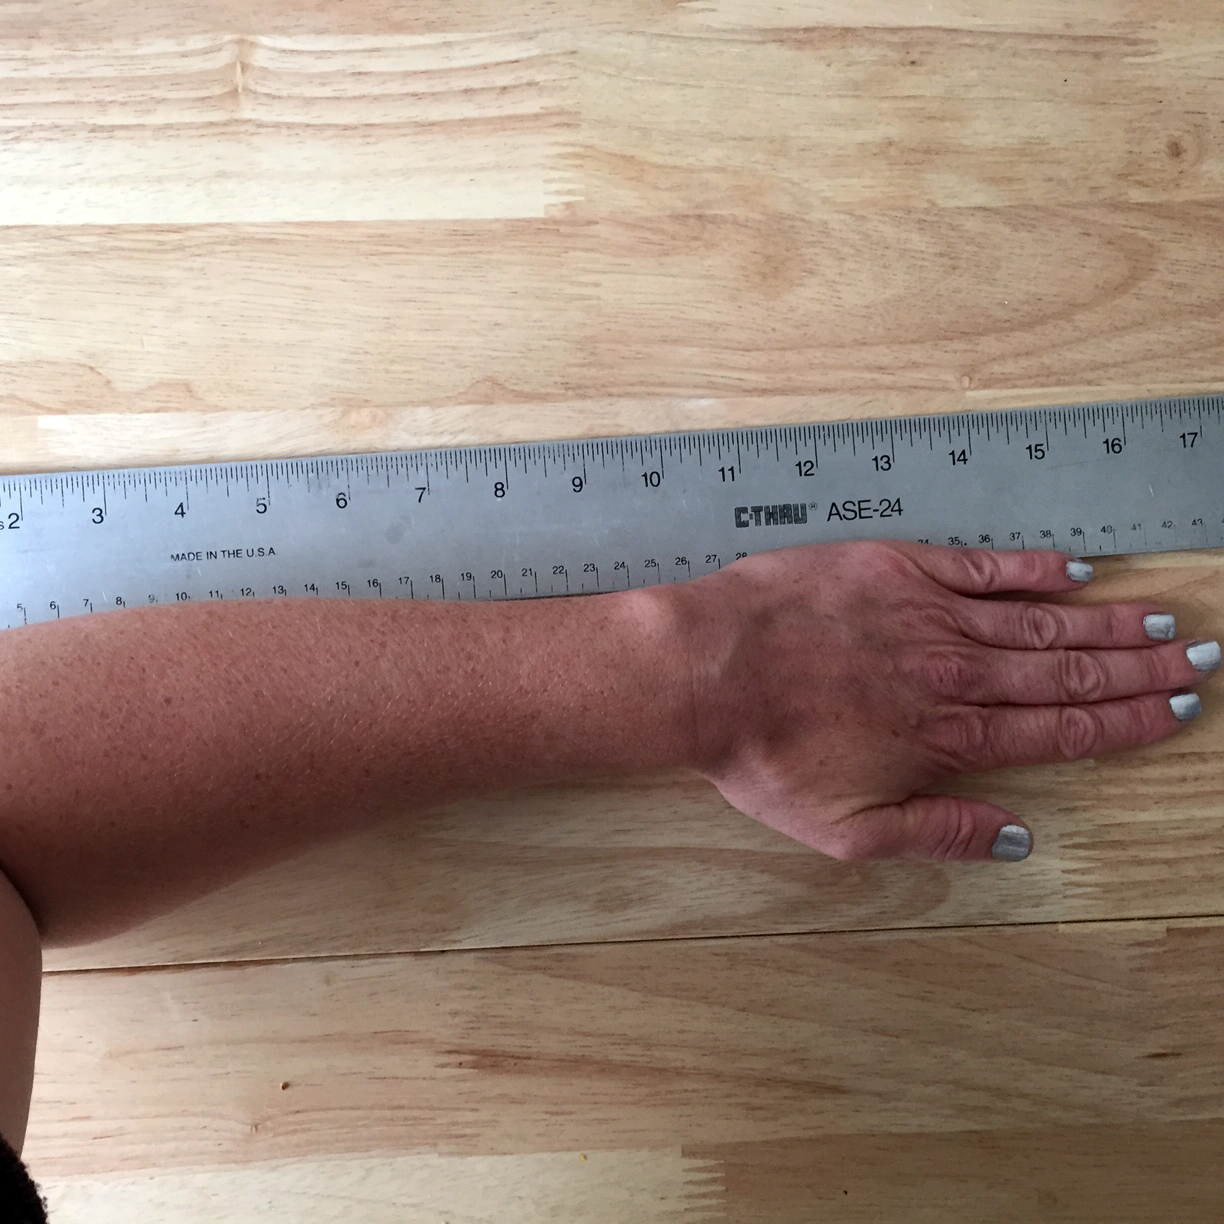 17" measurement from elbow to tip of middle finger